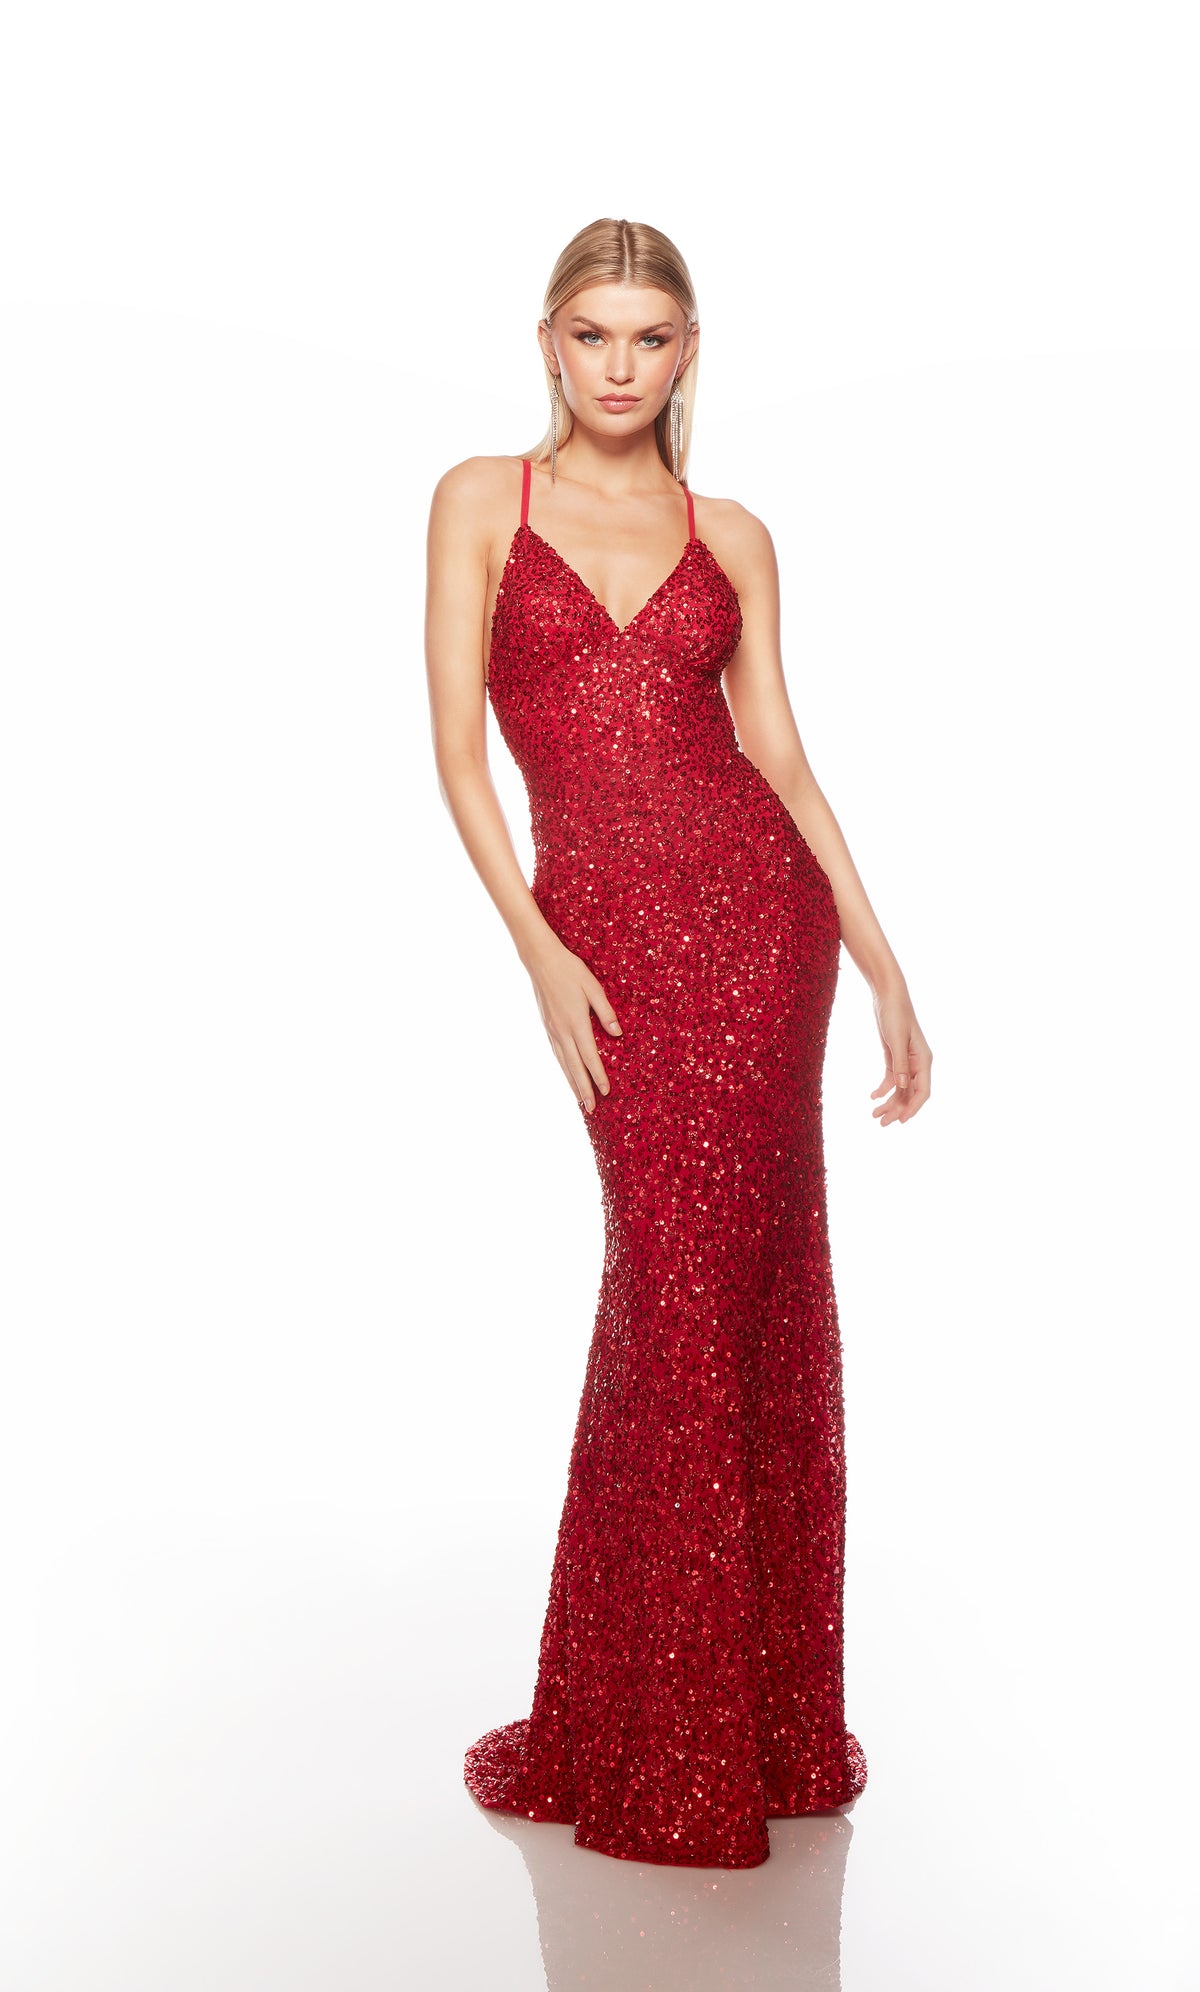 Red sequin gown with an V neckline, slit, and crisscross adjustable strap back, and an slight train for an elegant and alluring look.